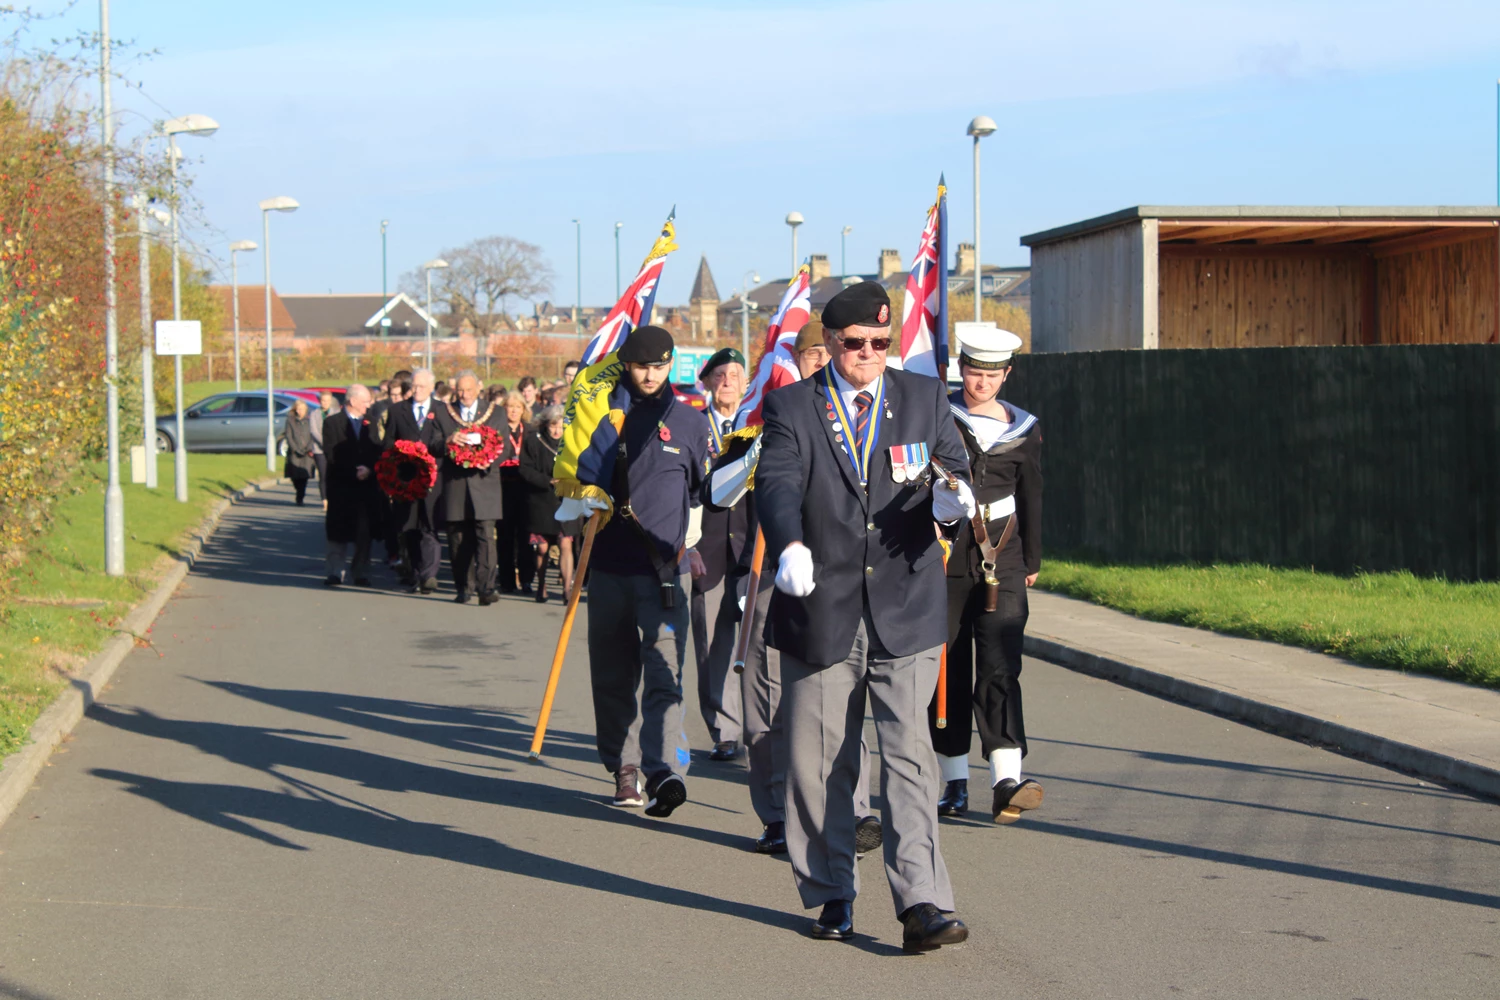 Sir William Turner's School Service of Remembrance at Redcar & Cleveland College